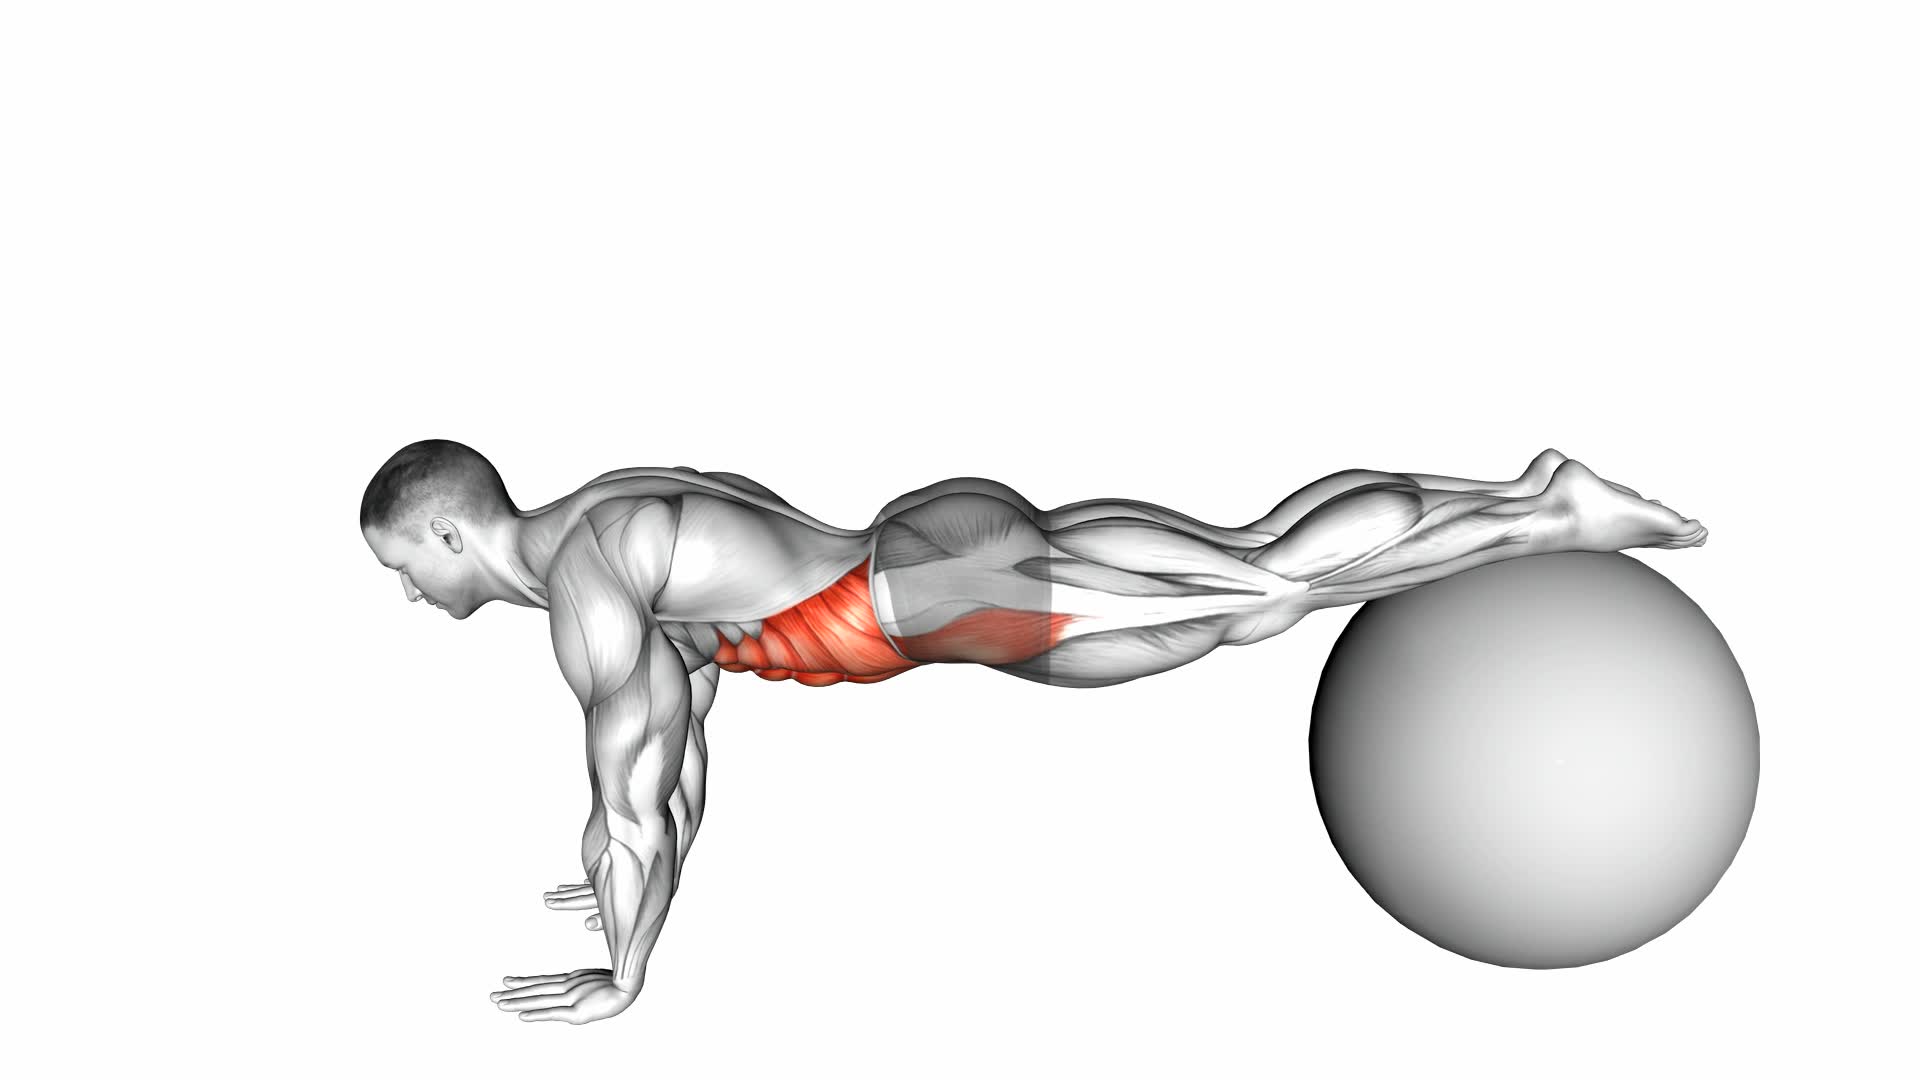 Pull-In (On Stability Ball) - Video Exercise Guide & Tips